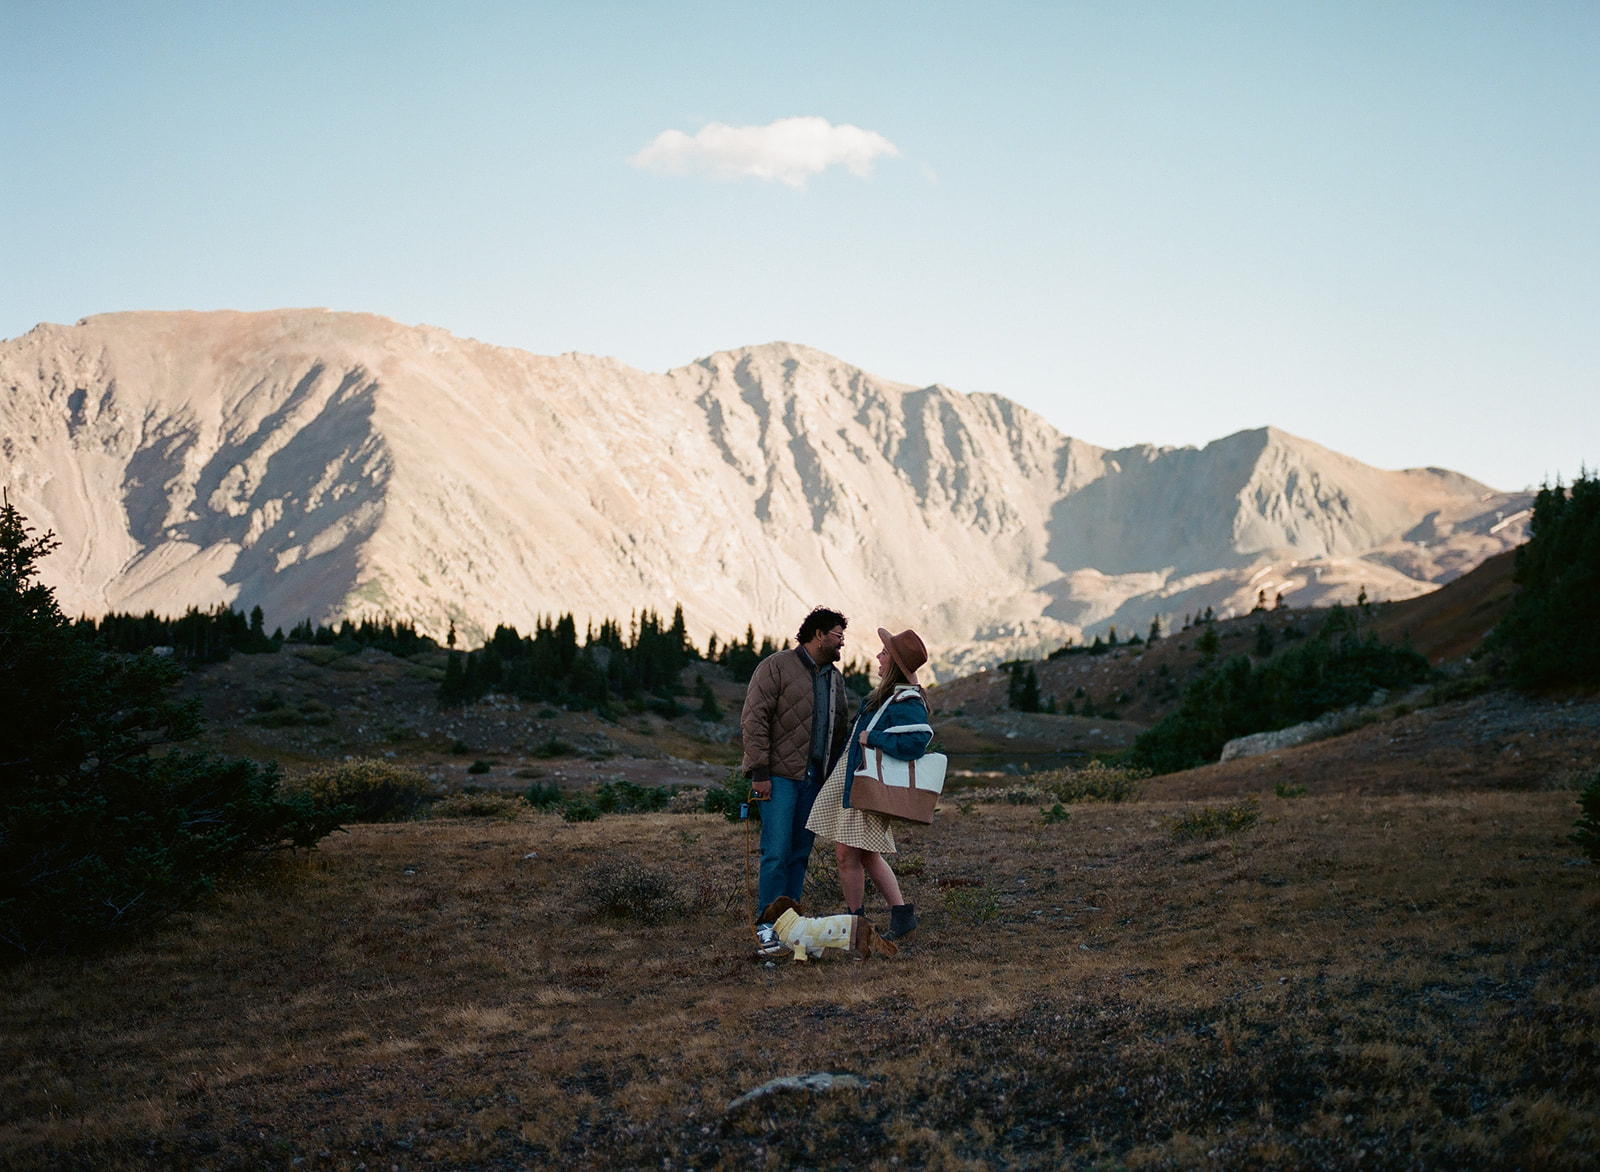 A film phot of the glorious mountains, fully lit by the setting sun, and the couple posing before moving locations.